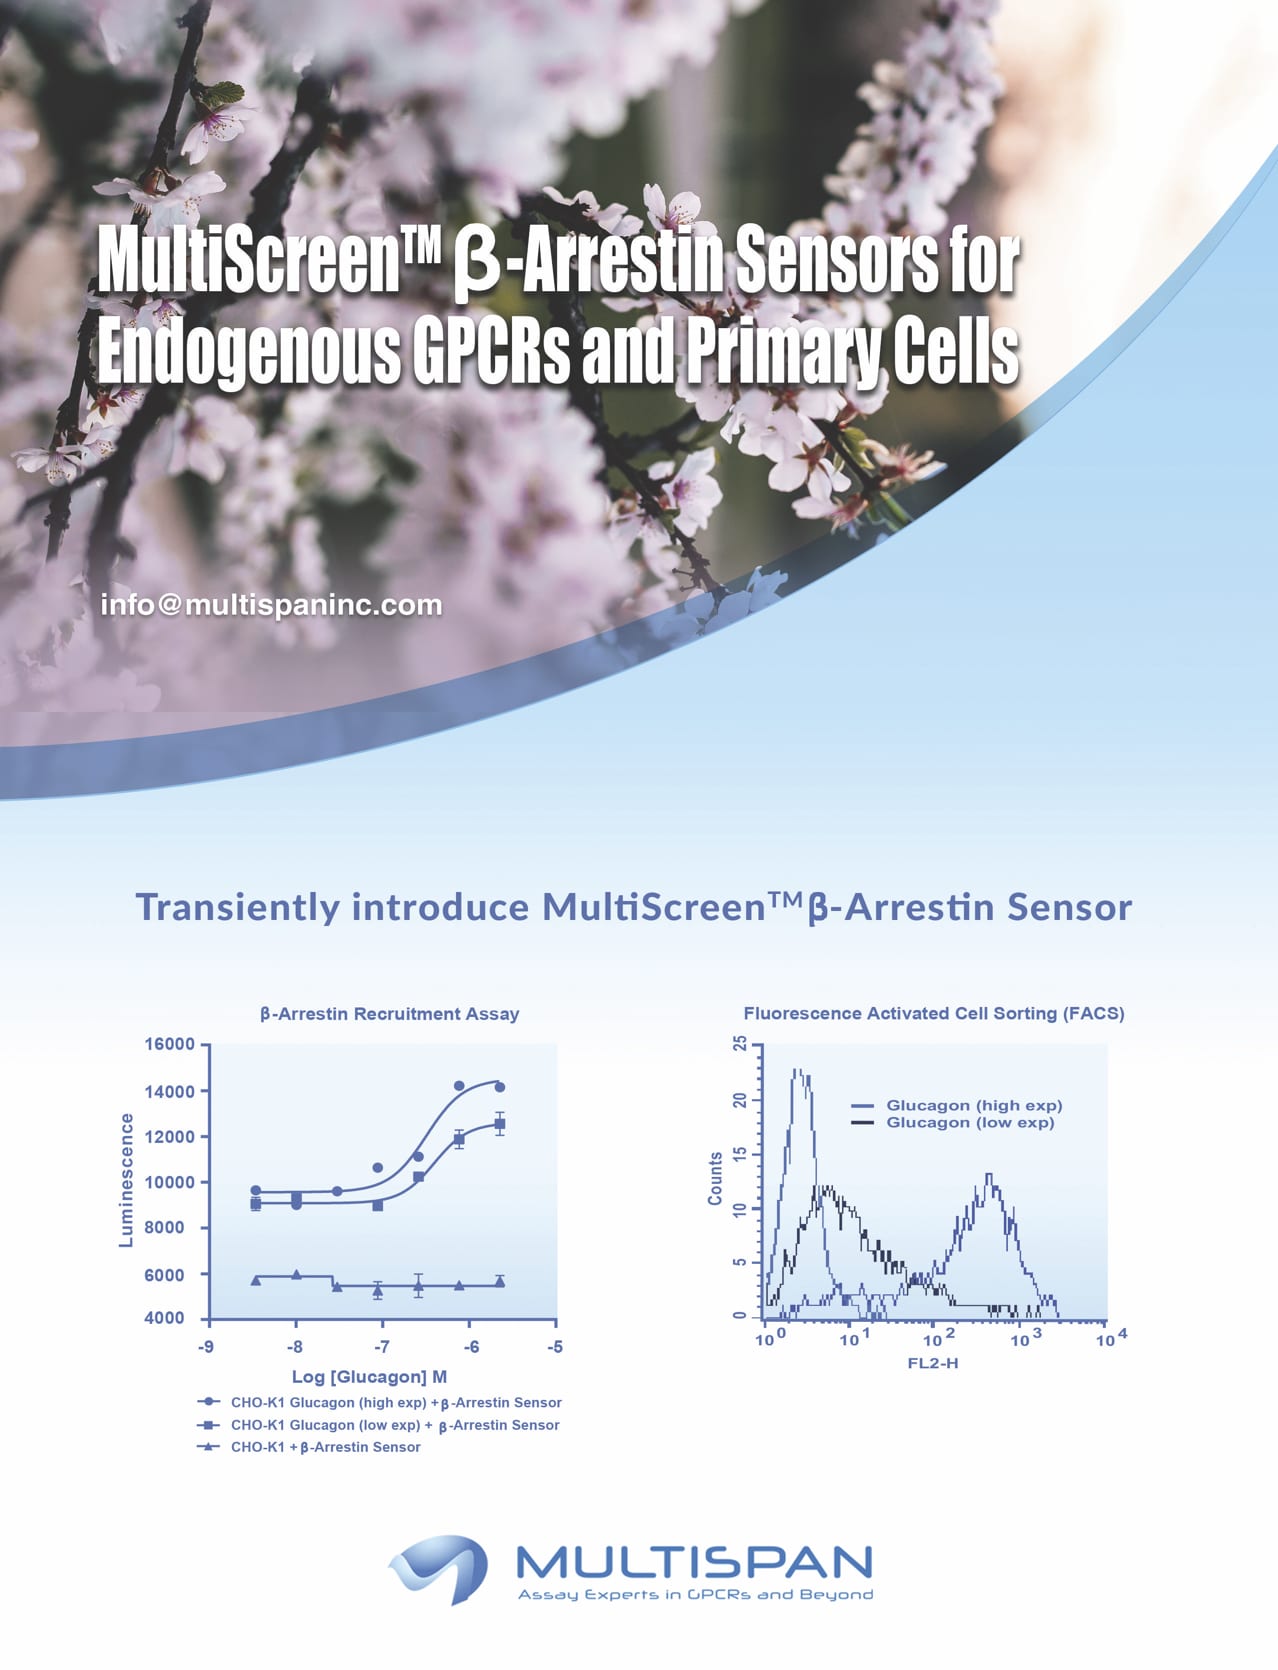 New Cell-based Assays Developed by Multispan